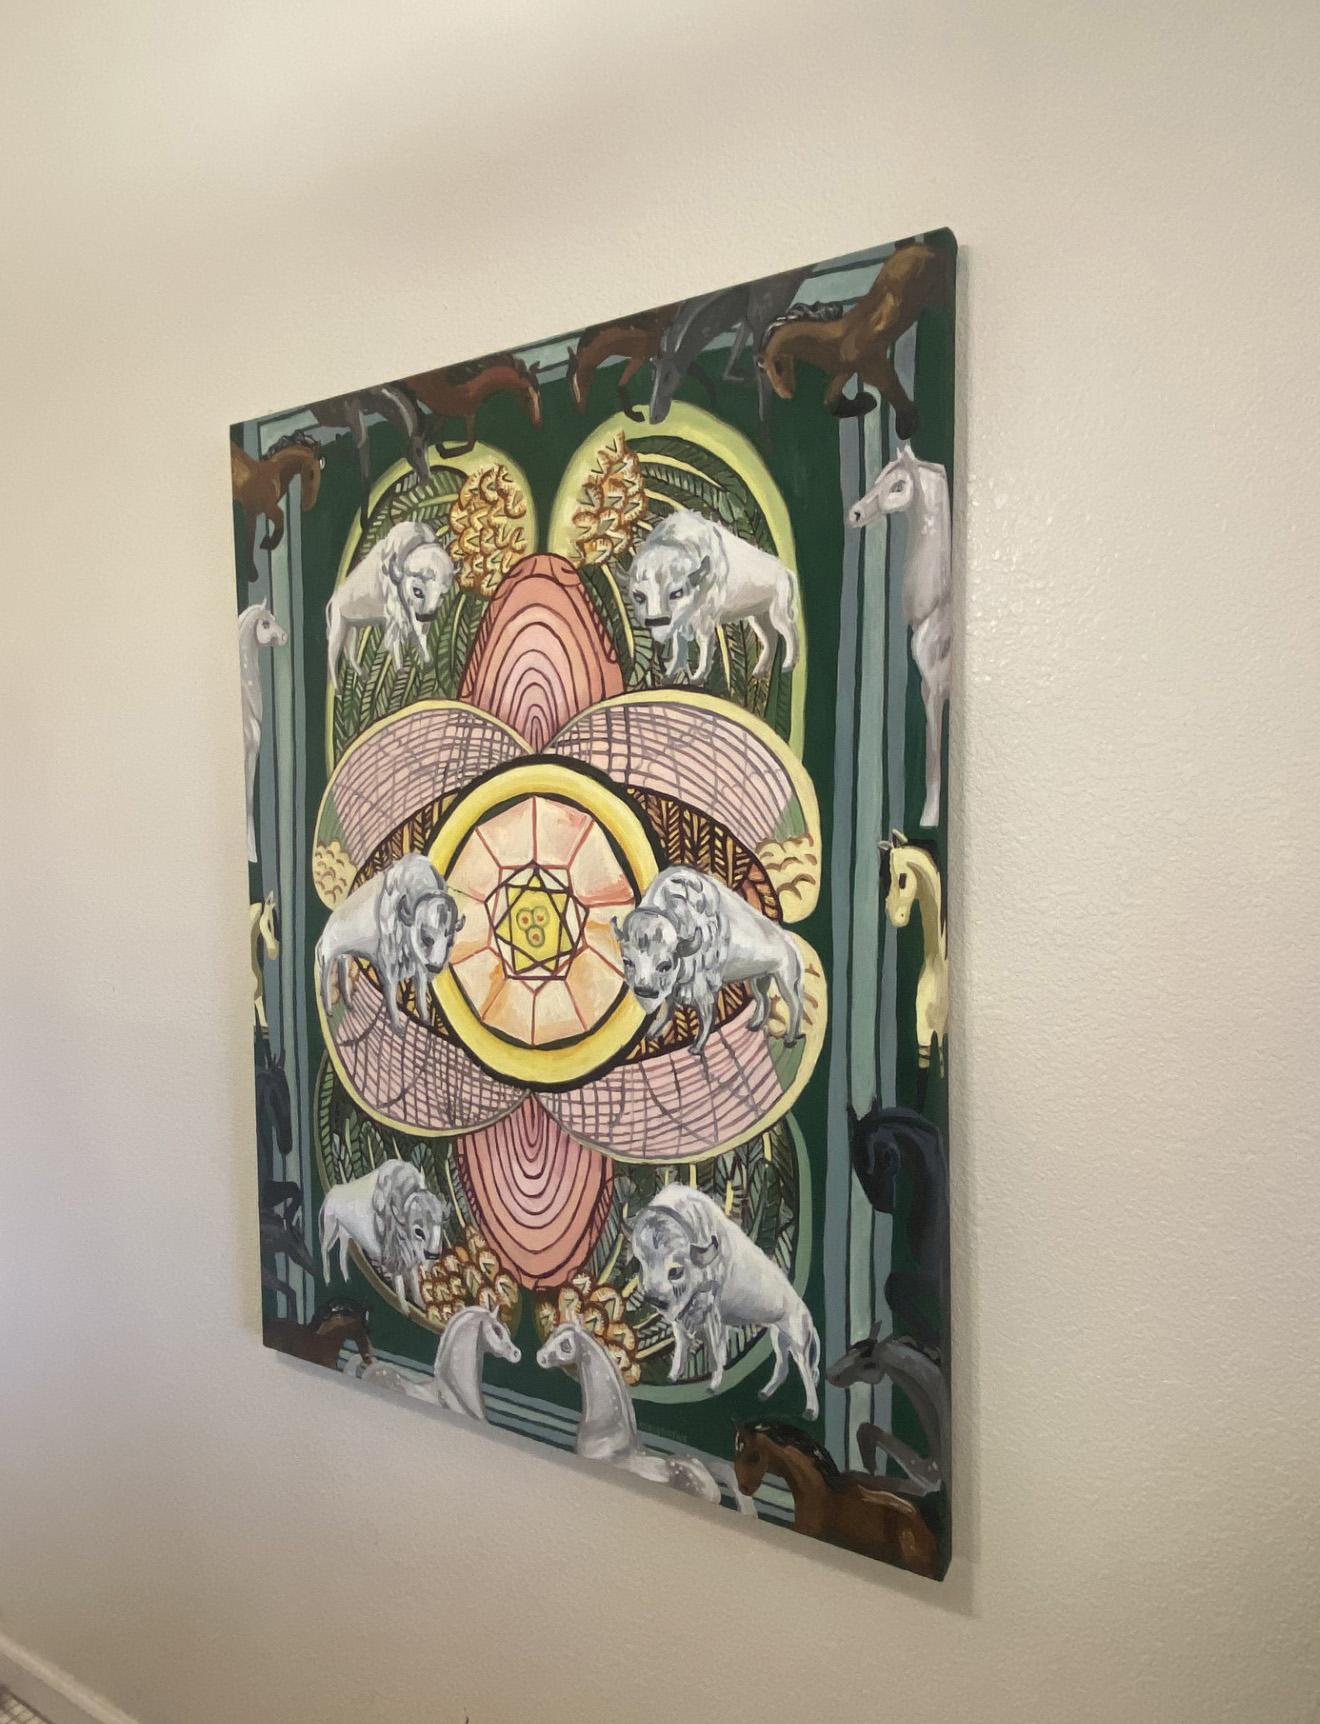 <p>Artist Comments<br />The painting reinterprets the Six of Pentacles tarot card, delving into the concept of gaining material wealth and enjoying one's work. The green hues symbolize abundance, nature, and growth, while the white bison adds a